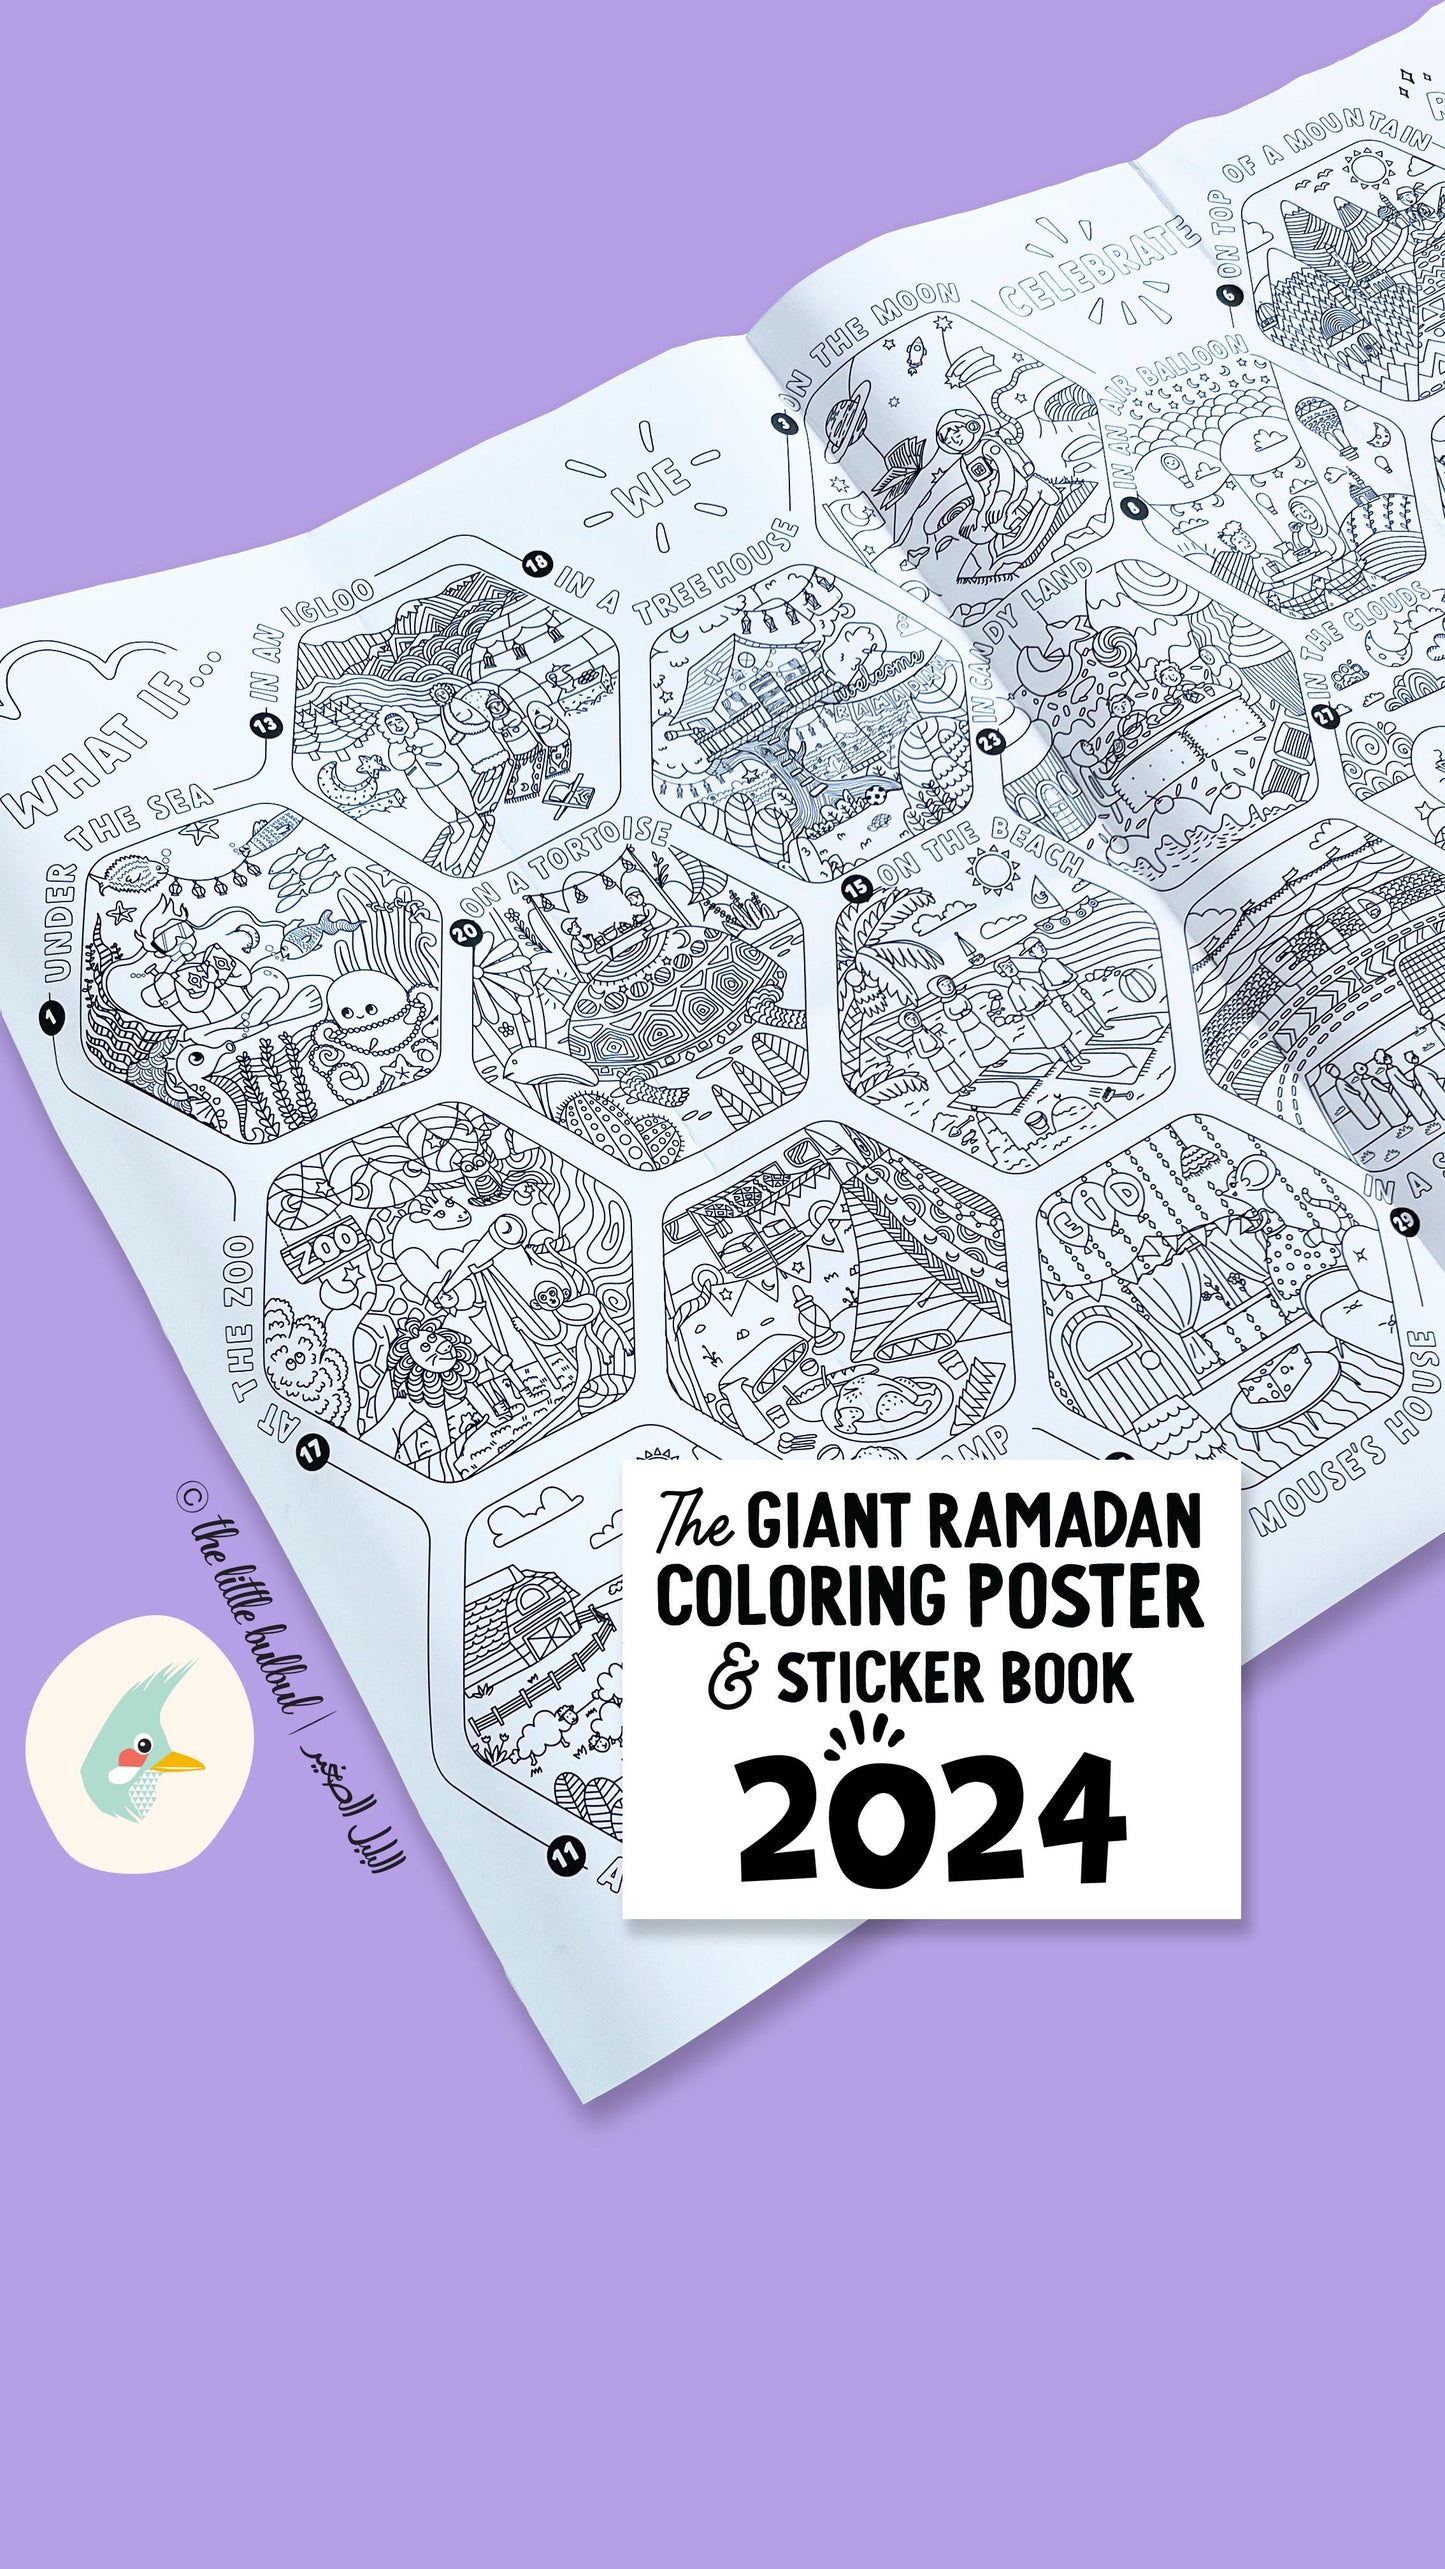 Giant Ramadan Coloring Poster and sticker book